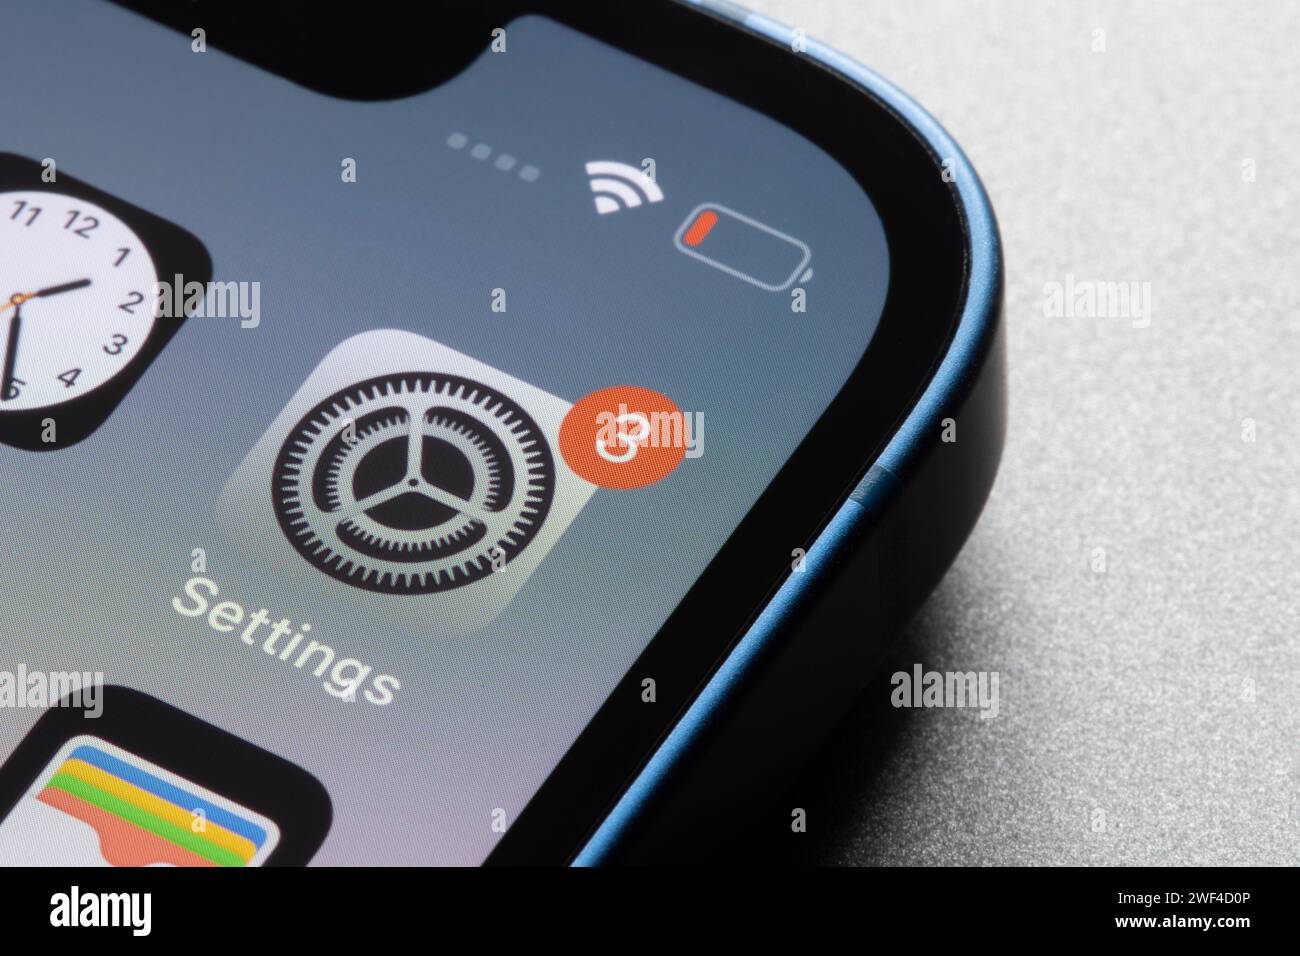 Closeup of the iOS Settings app icon with a notification badge seen on an iPhone. Stock Photo